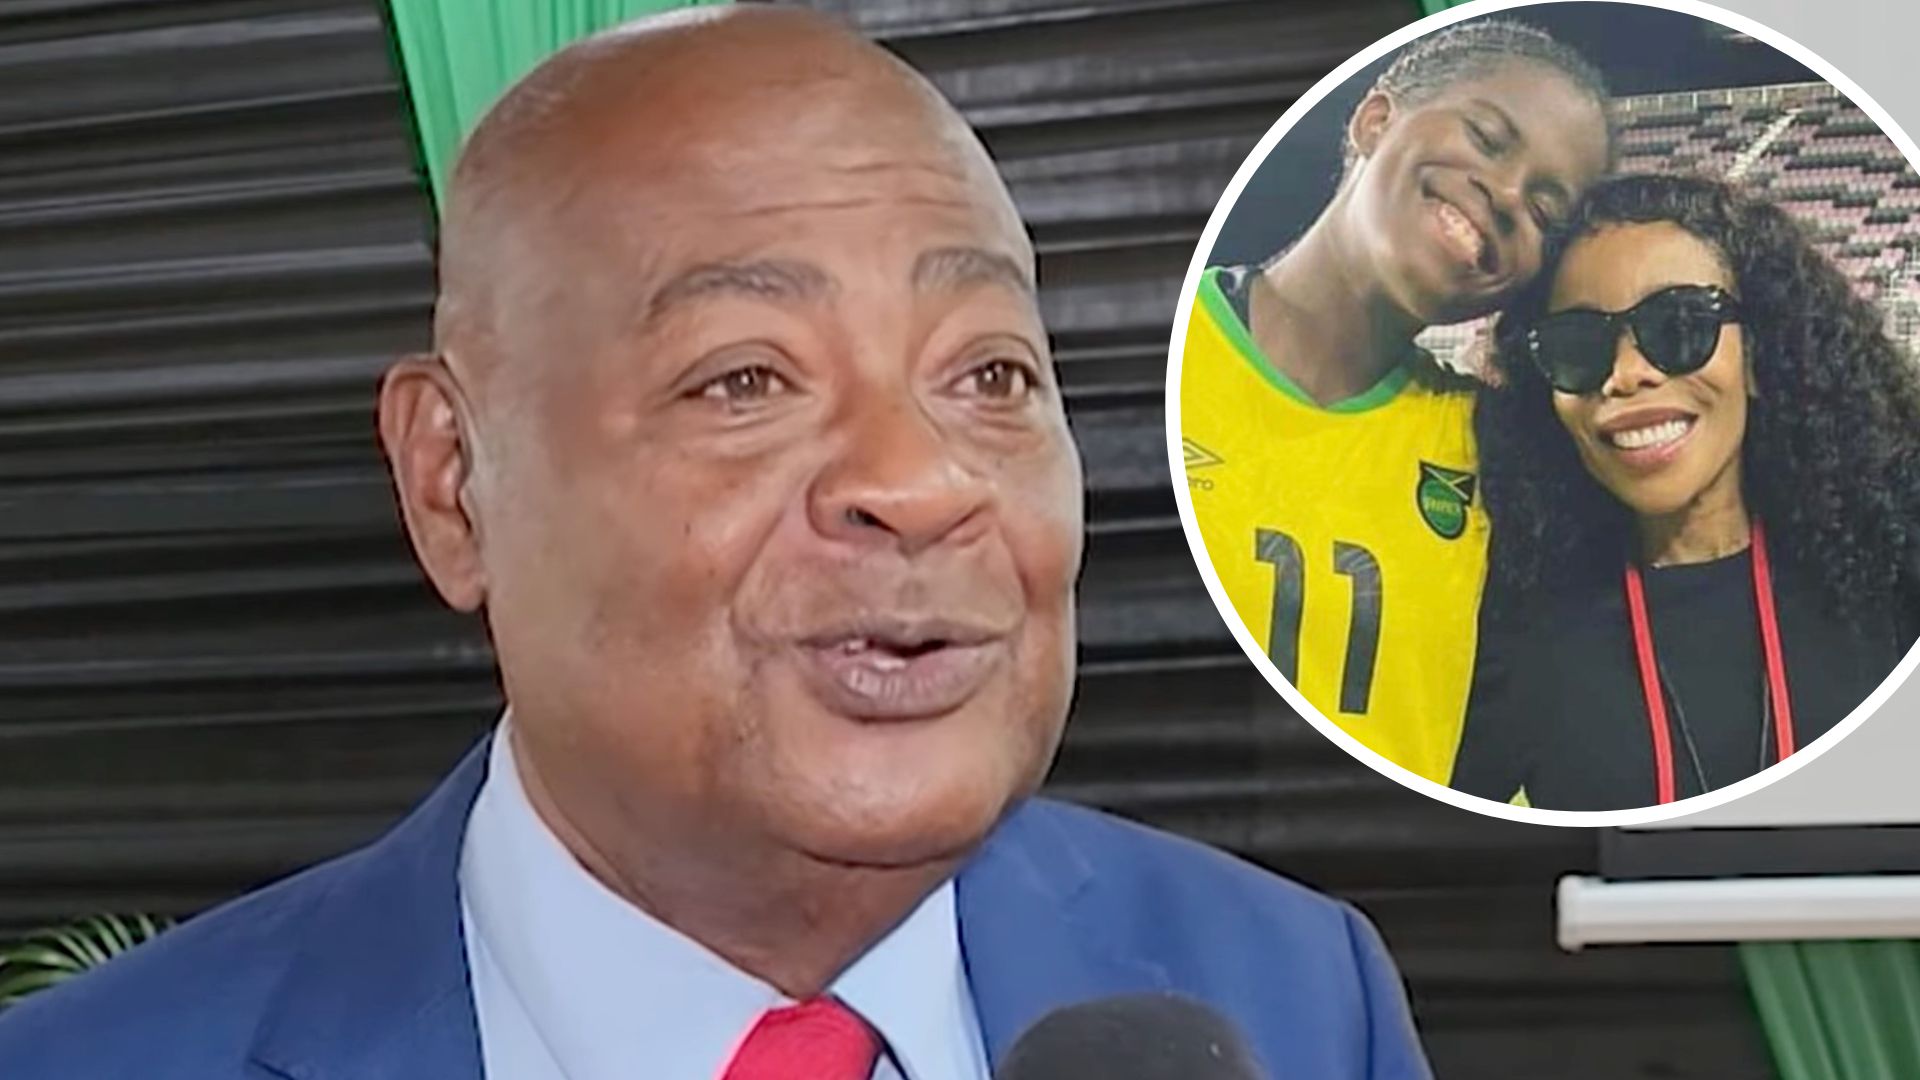 JFF President Gives New Details On Fallout With Cedella Marley And Reggae Girlz, Says Some “Accusations” Not Authentic - Watch Interview